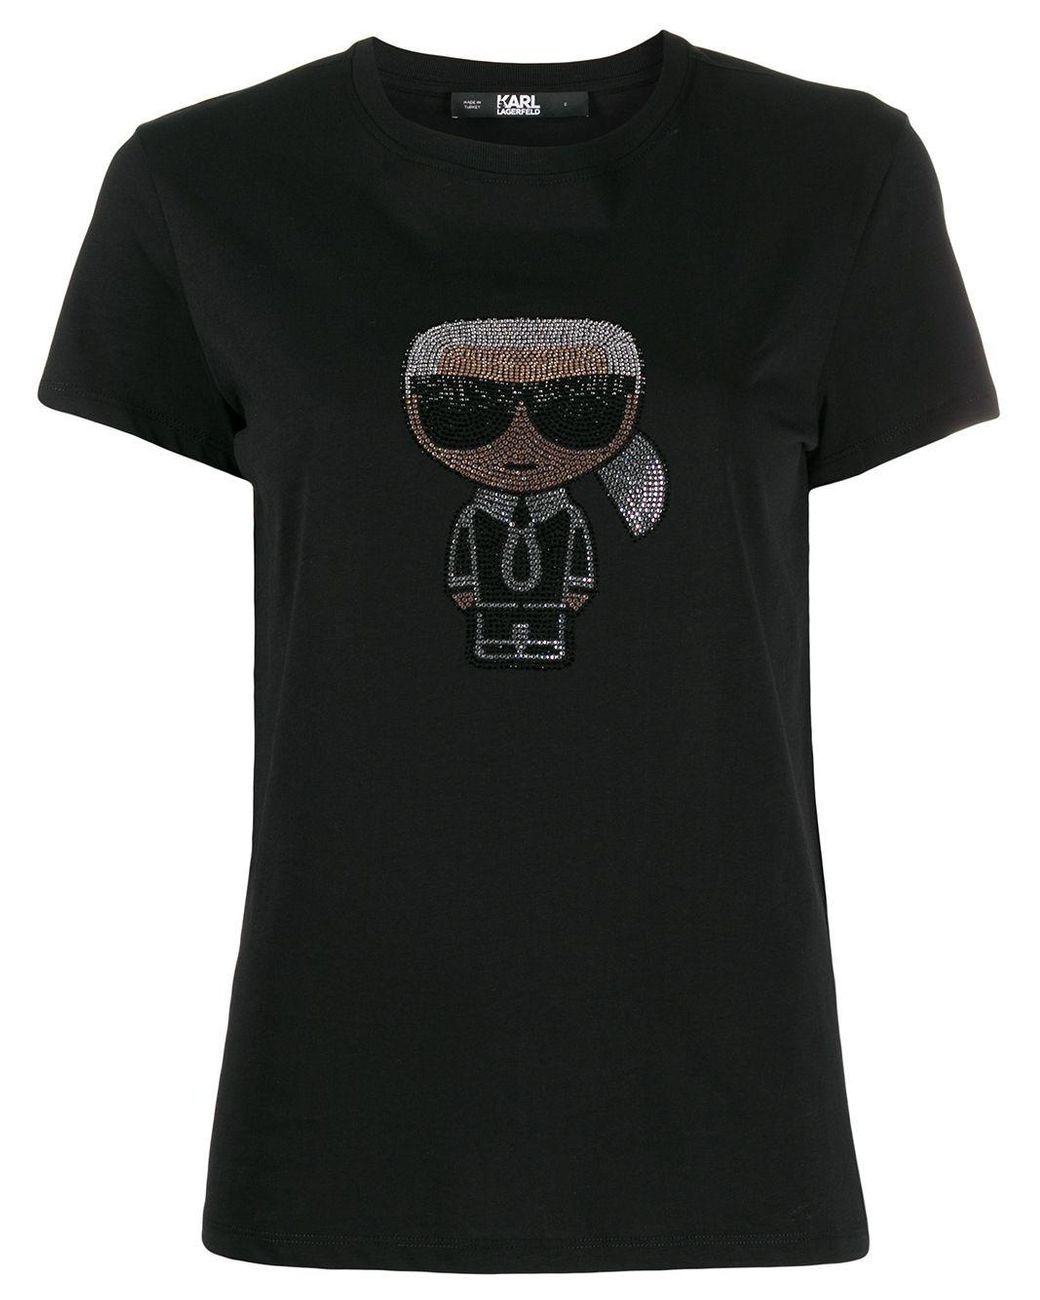 Karl Lagerfeld Cotton Iconic Embellished T-shirt in Black - Save 4% - Lyst